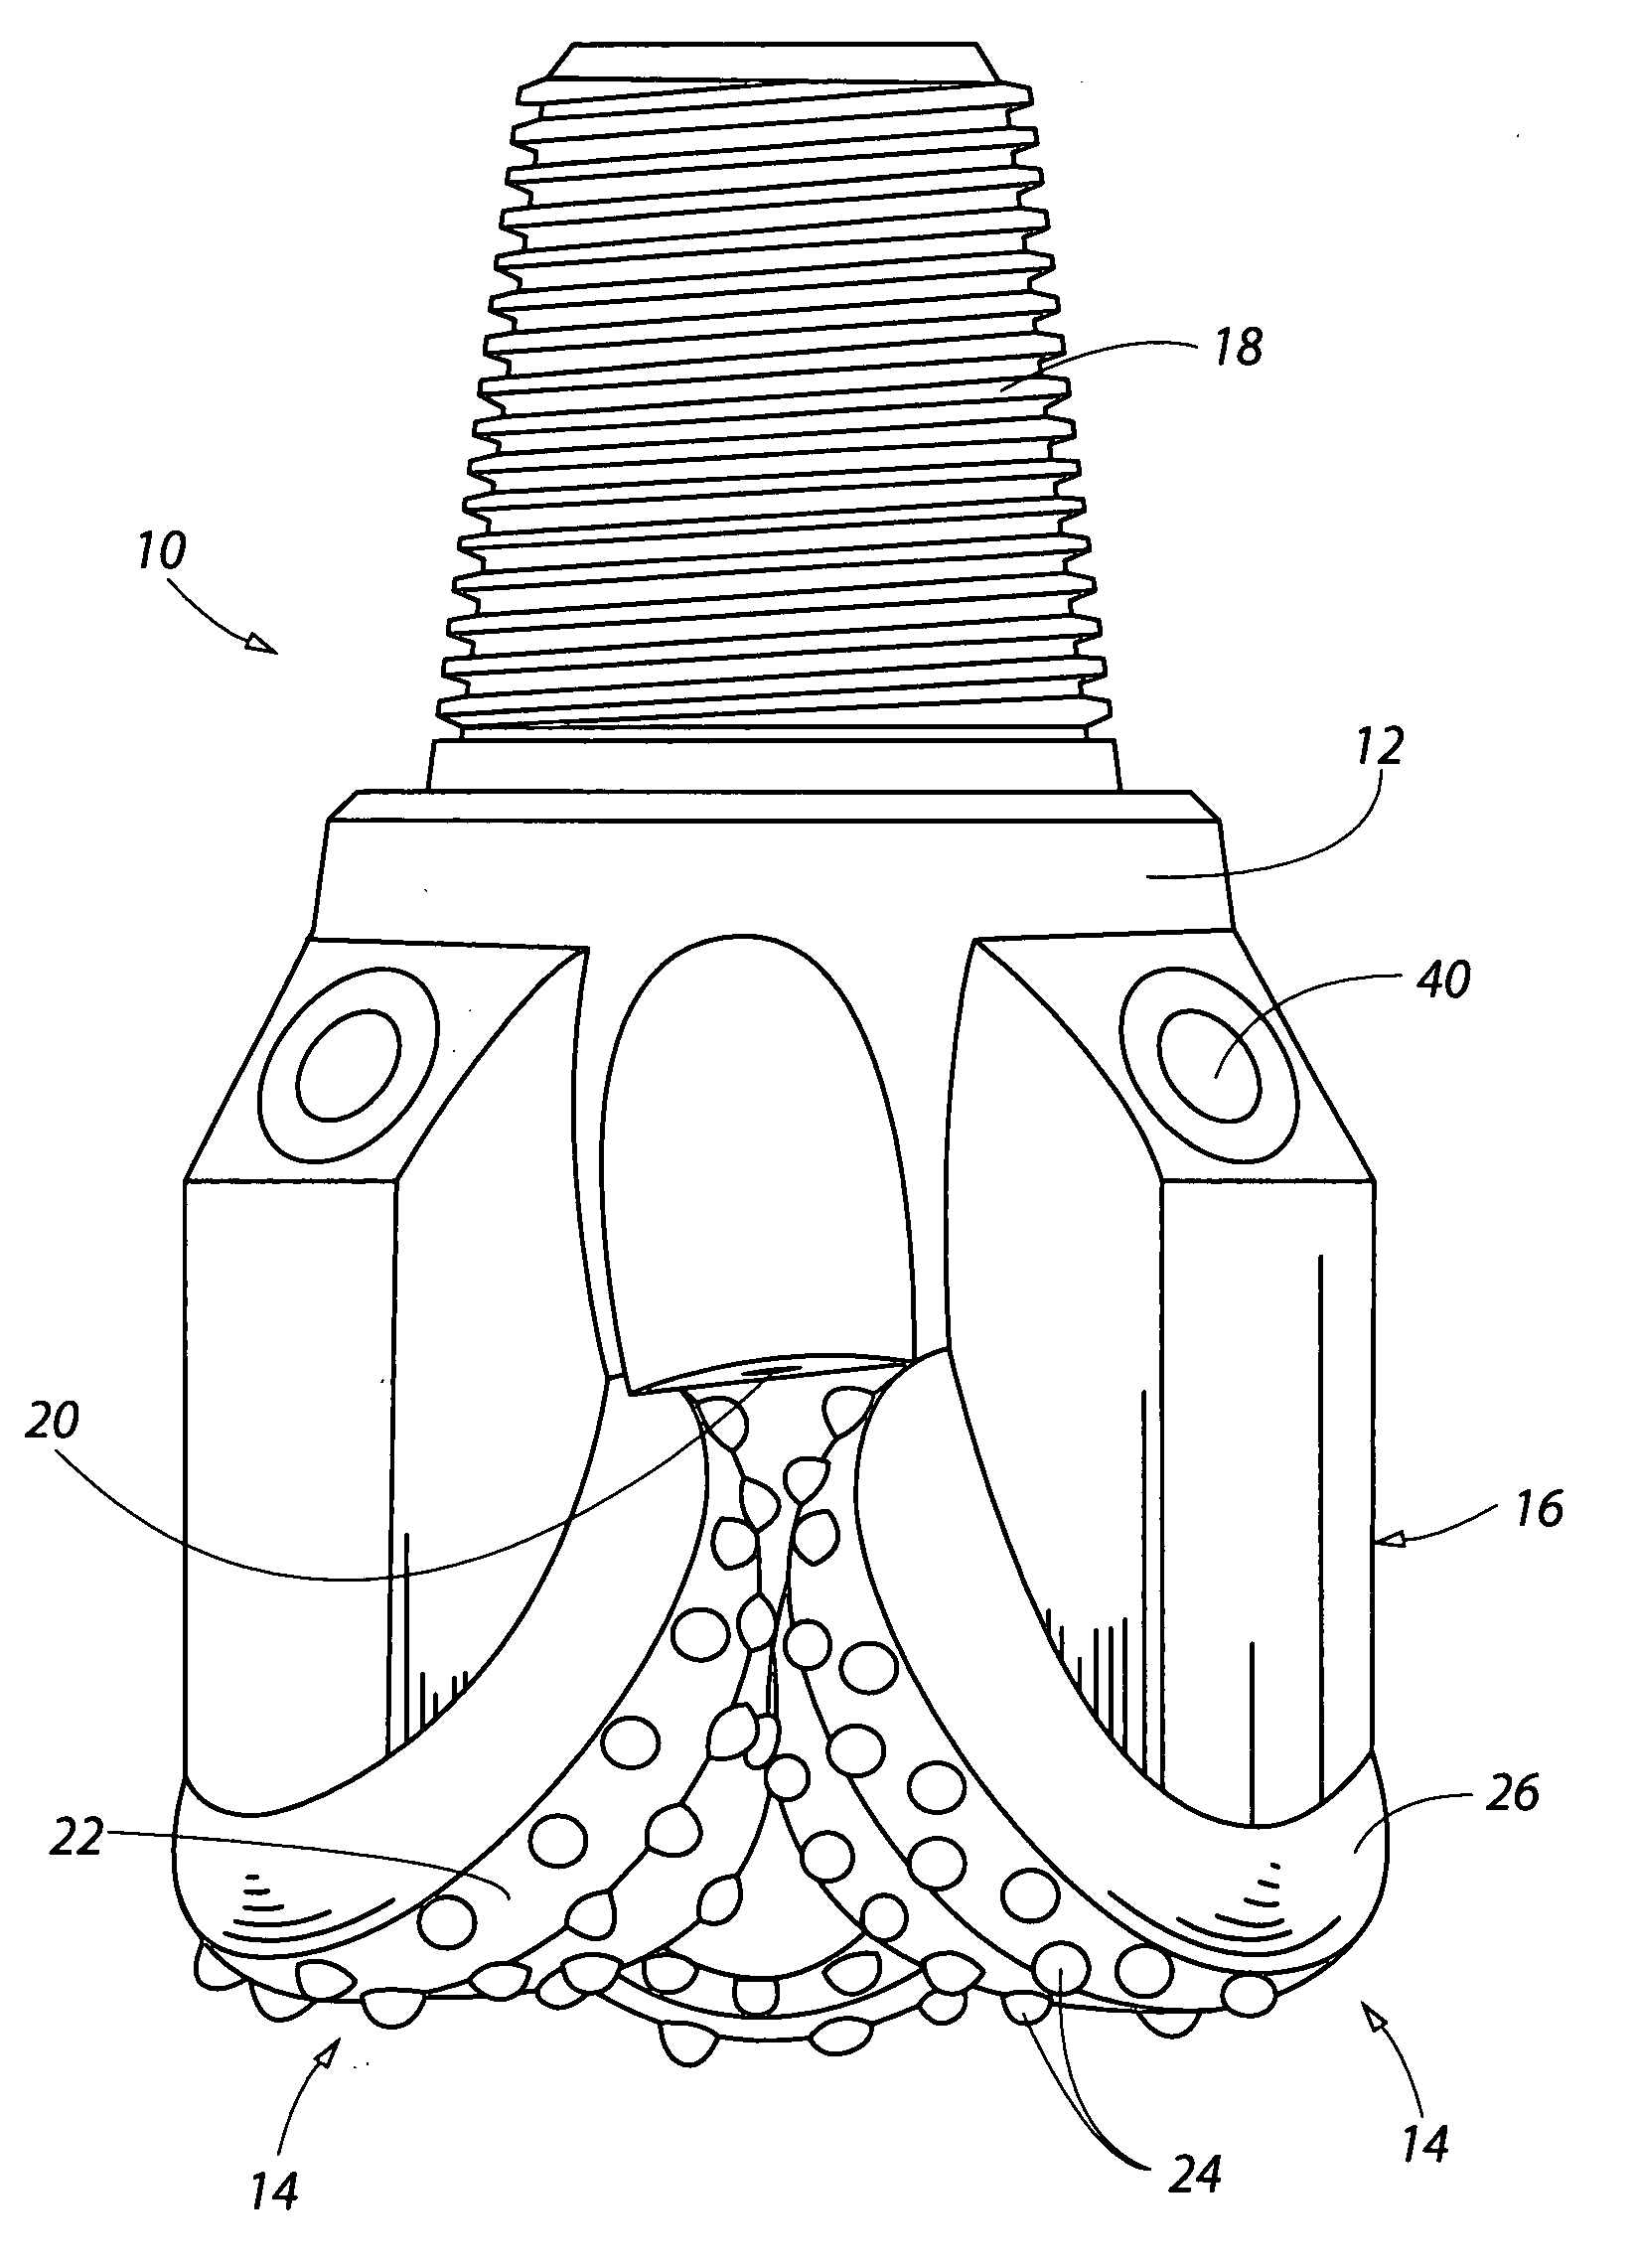 Earth-boring tools and cutter assemblies having a cutting element co-sintered with a cone structure, methods of using the same